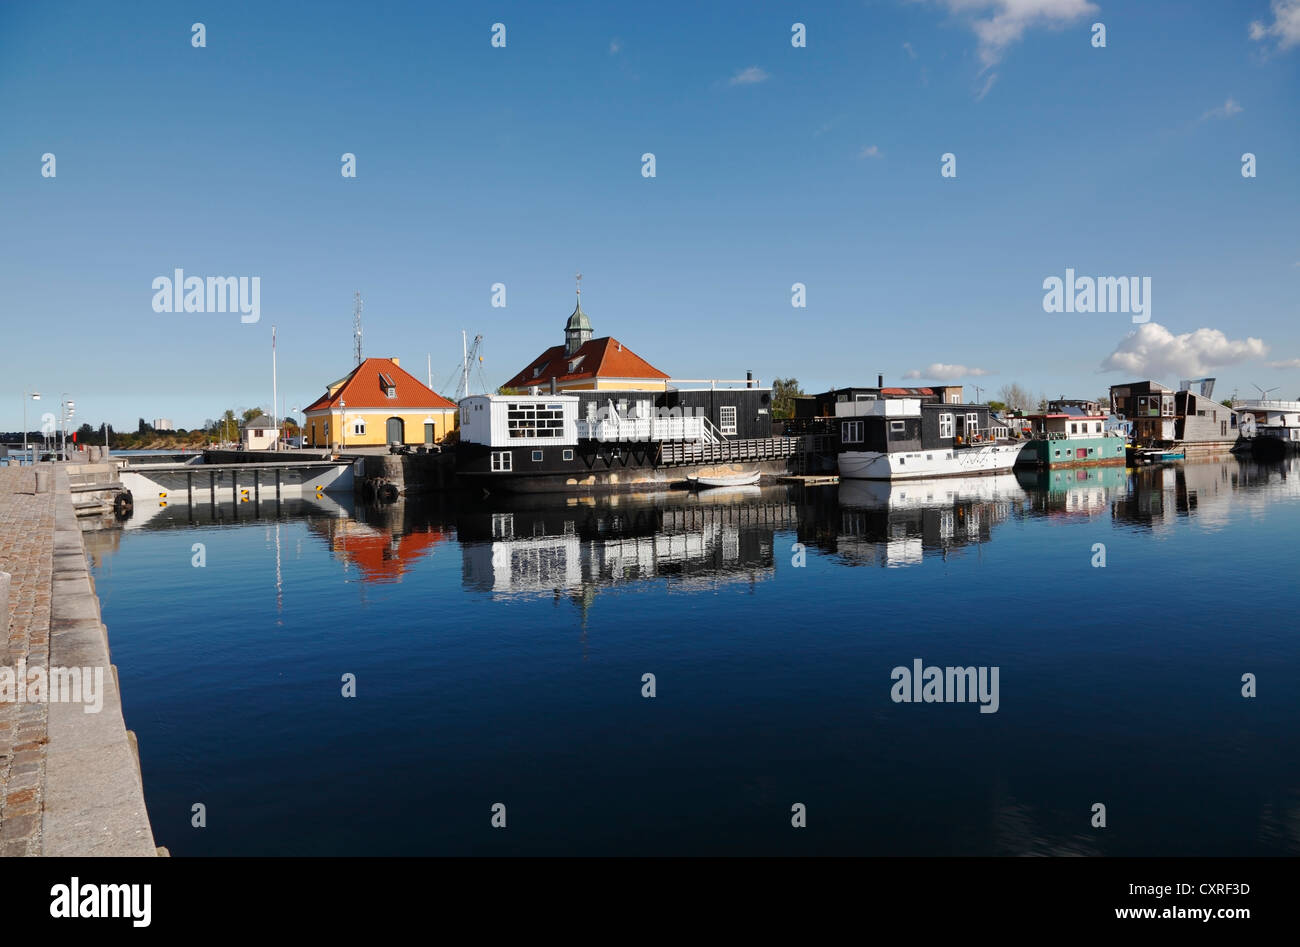 The lock in Sydhavnen (South Harbour) and moored houseboats in the port of Copenhagen, Denmark. Stock Photo